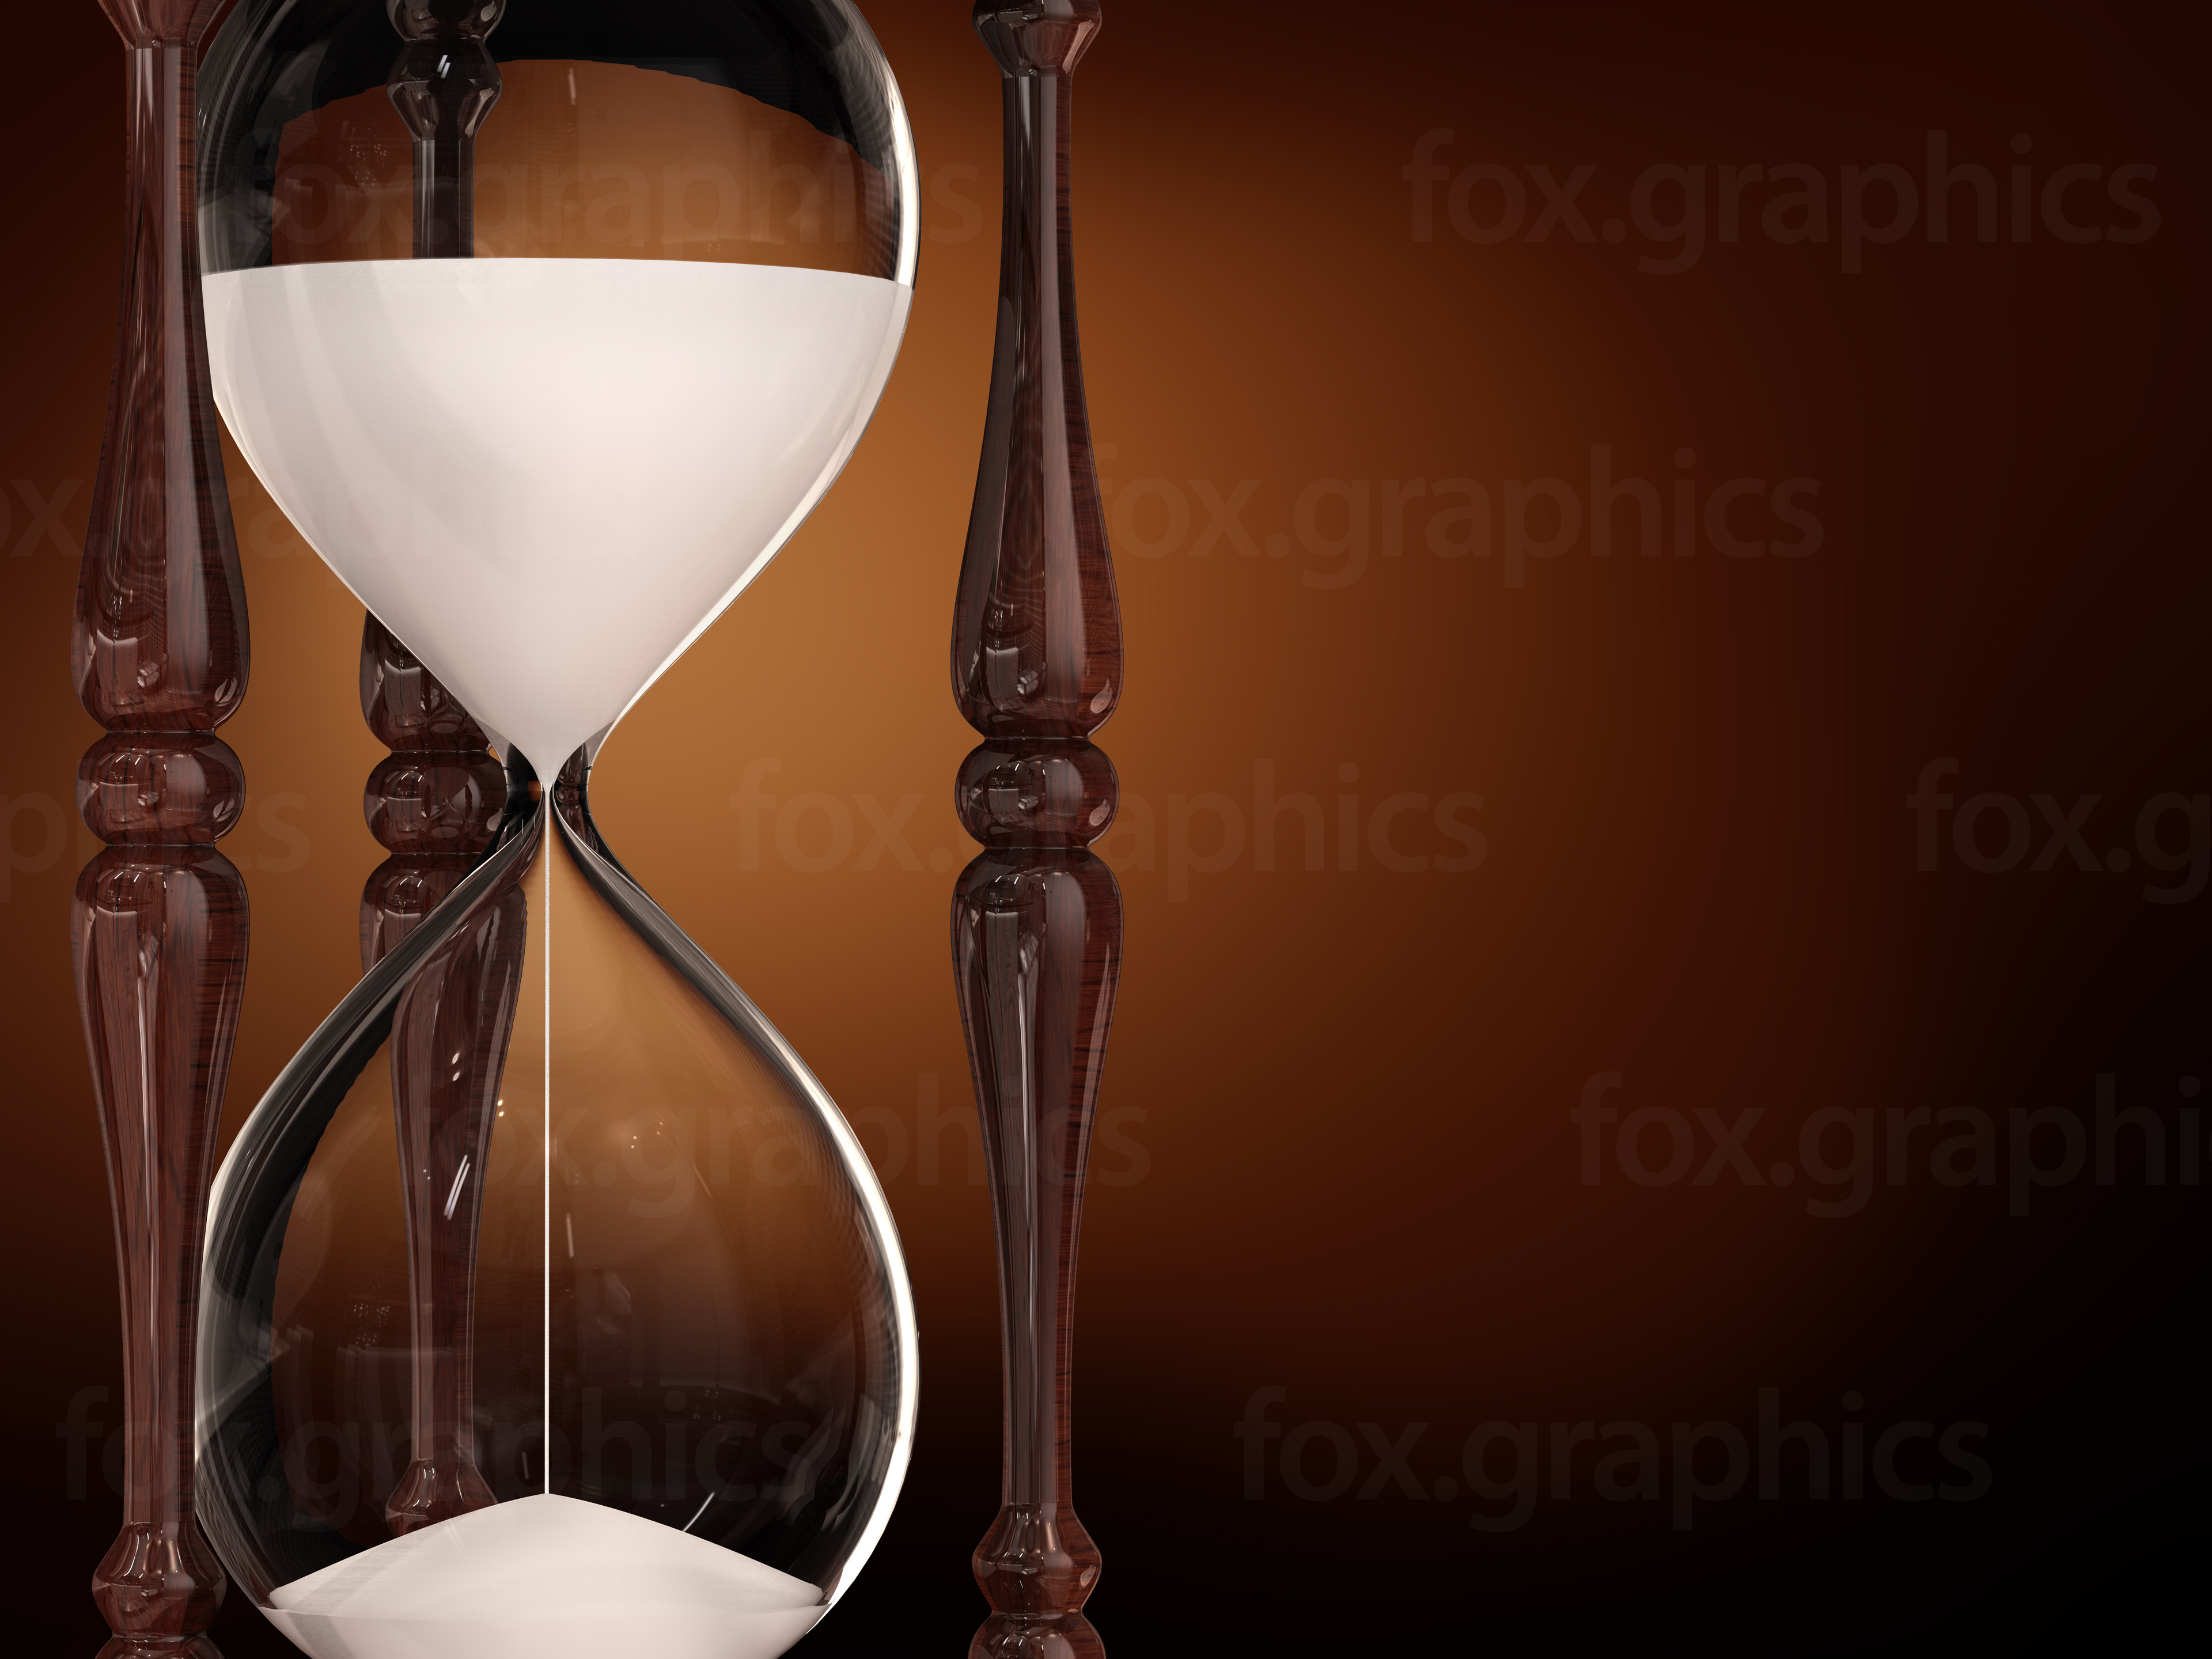 Sand Clock Wallpapers